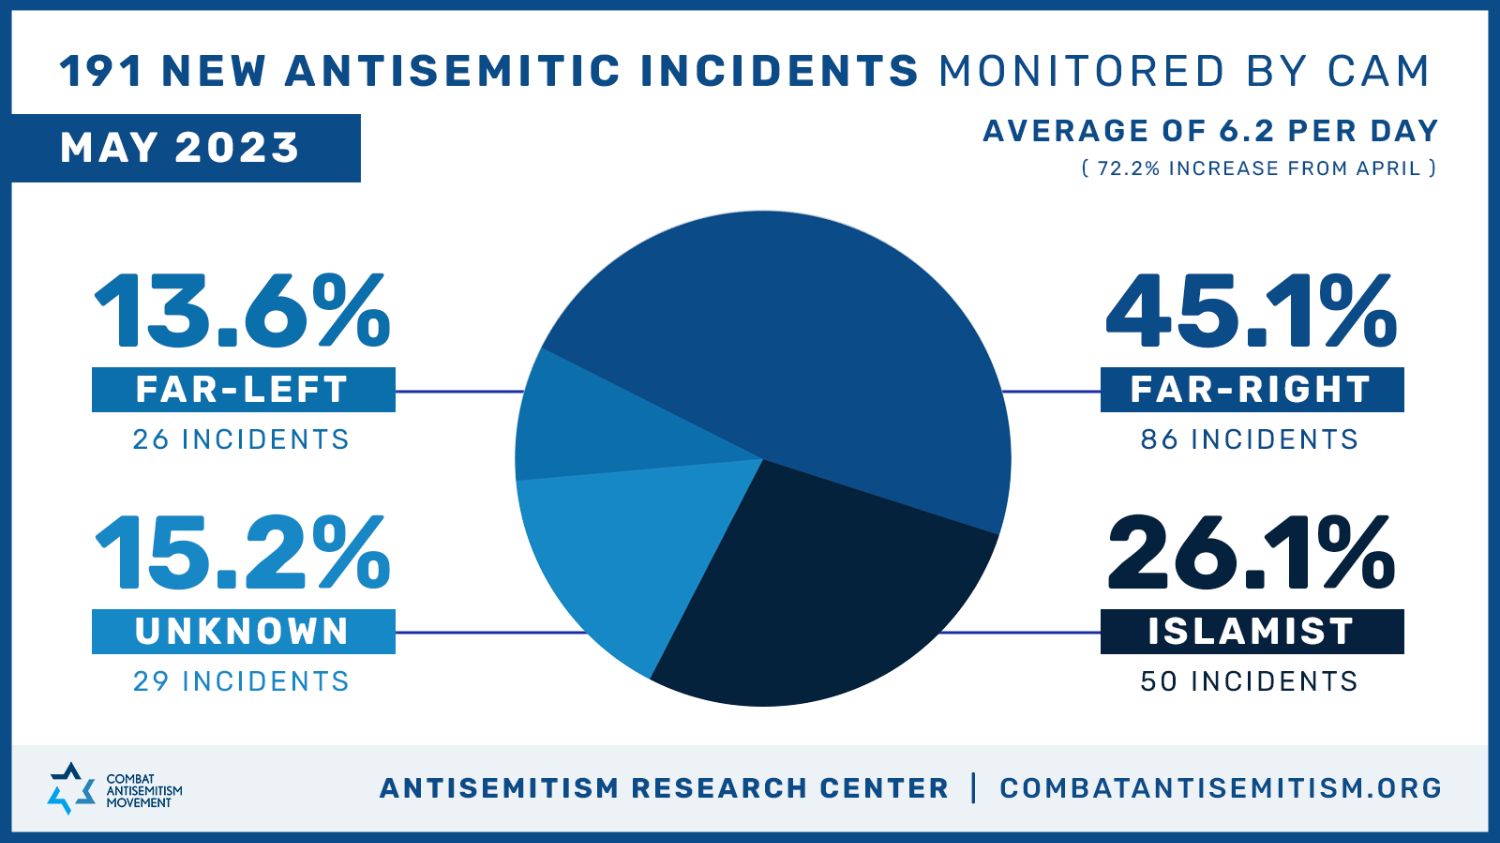 Through May, CAM Tracks Daily Average of 5.0 Antisemitic Incidents in 2023